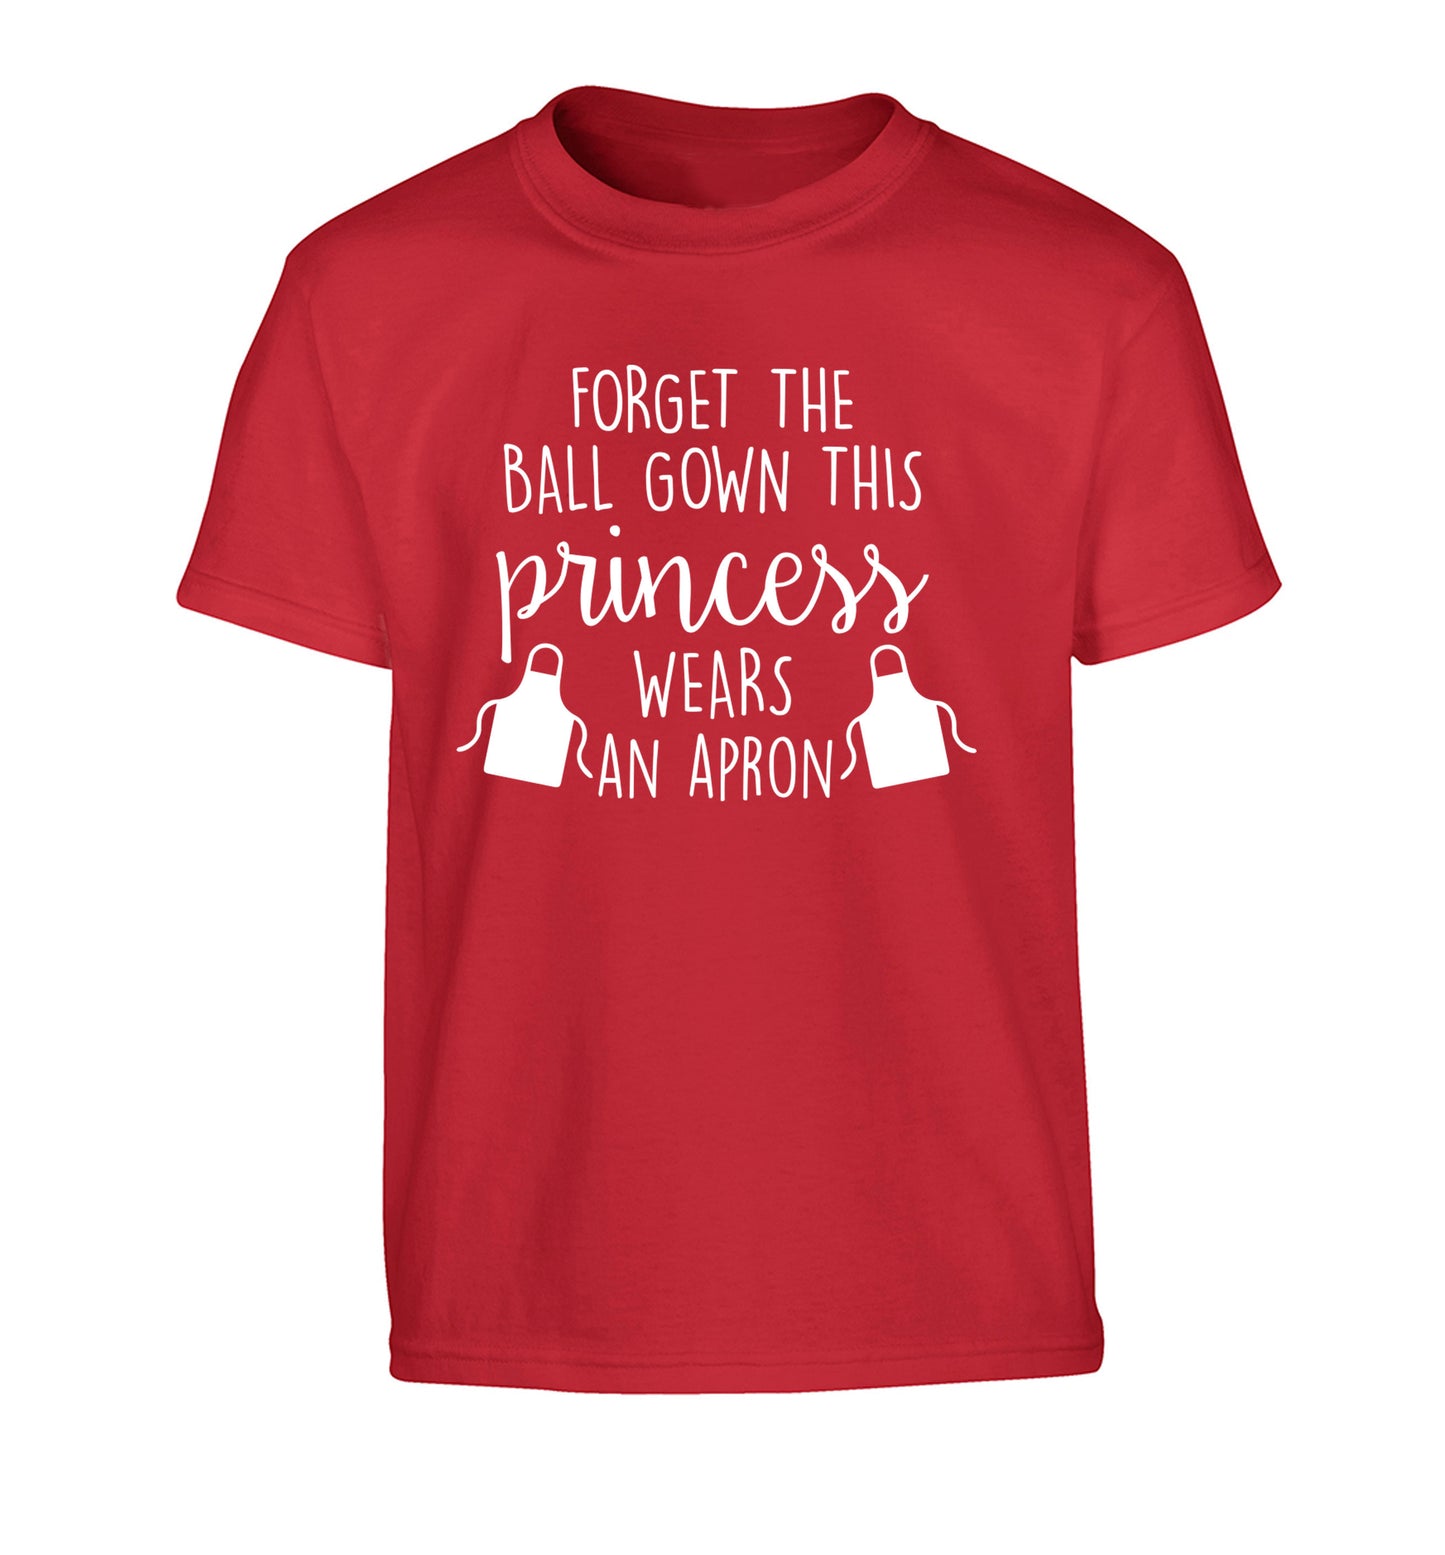 Forget the ball gown this princess wears an apron Children's red Tshirt 12-14 Years